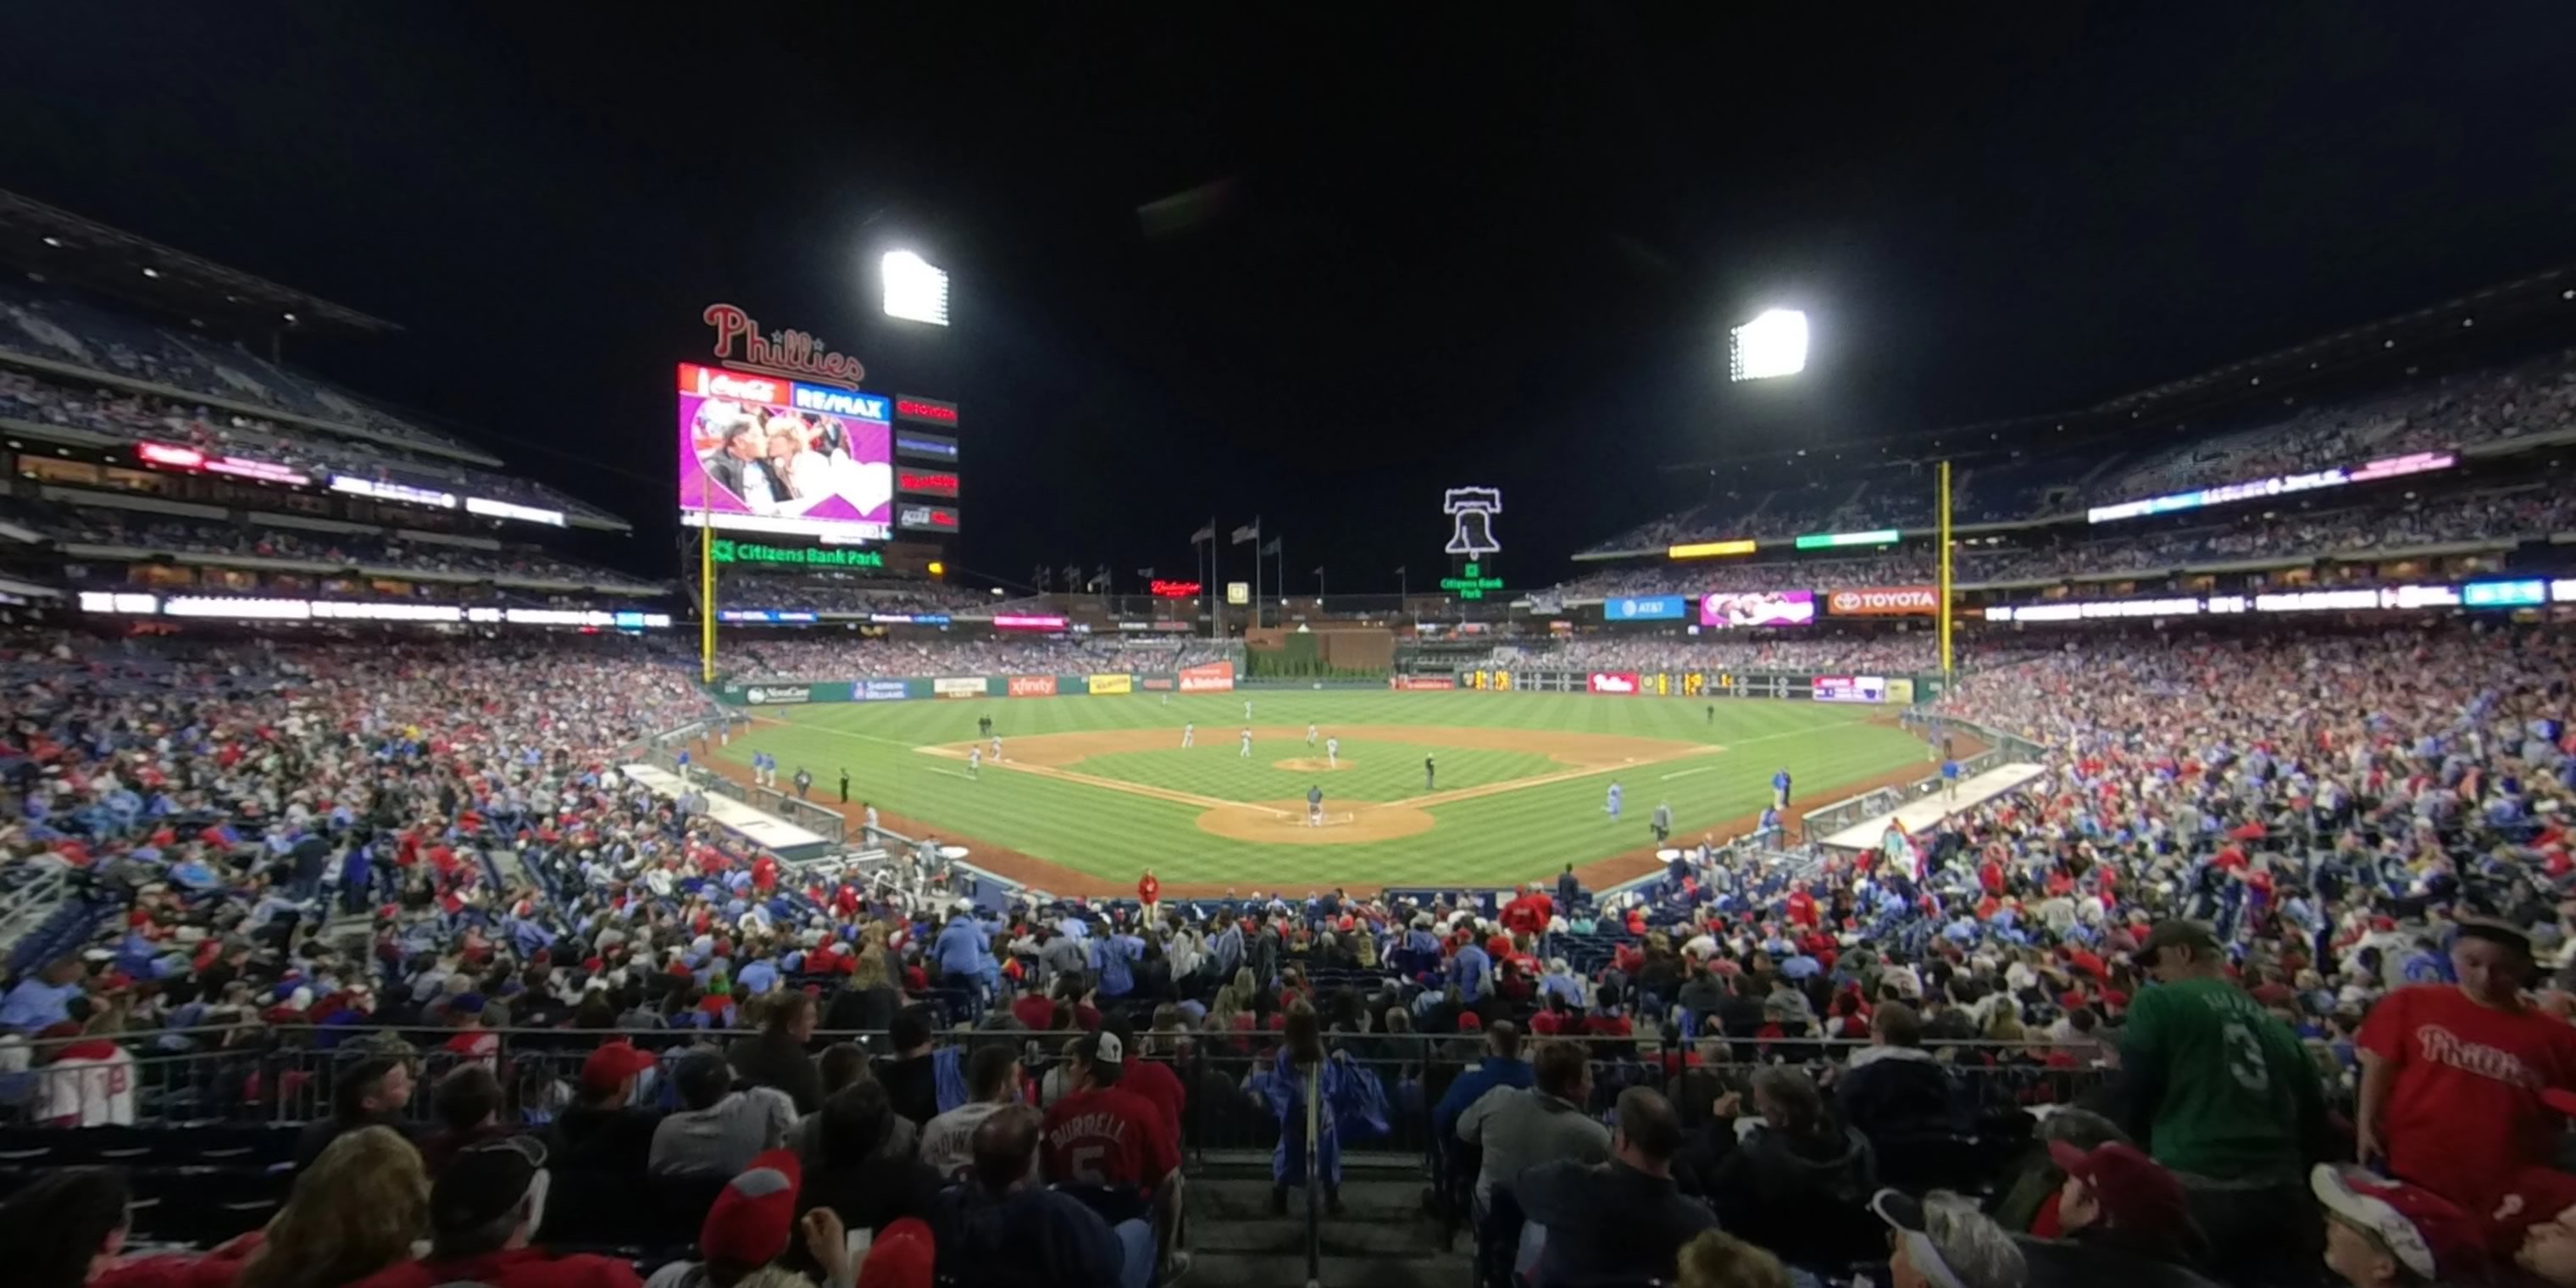 section 123 panoramic seat view  for baseball - citizens bank park